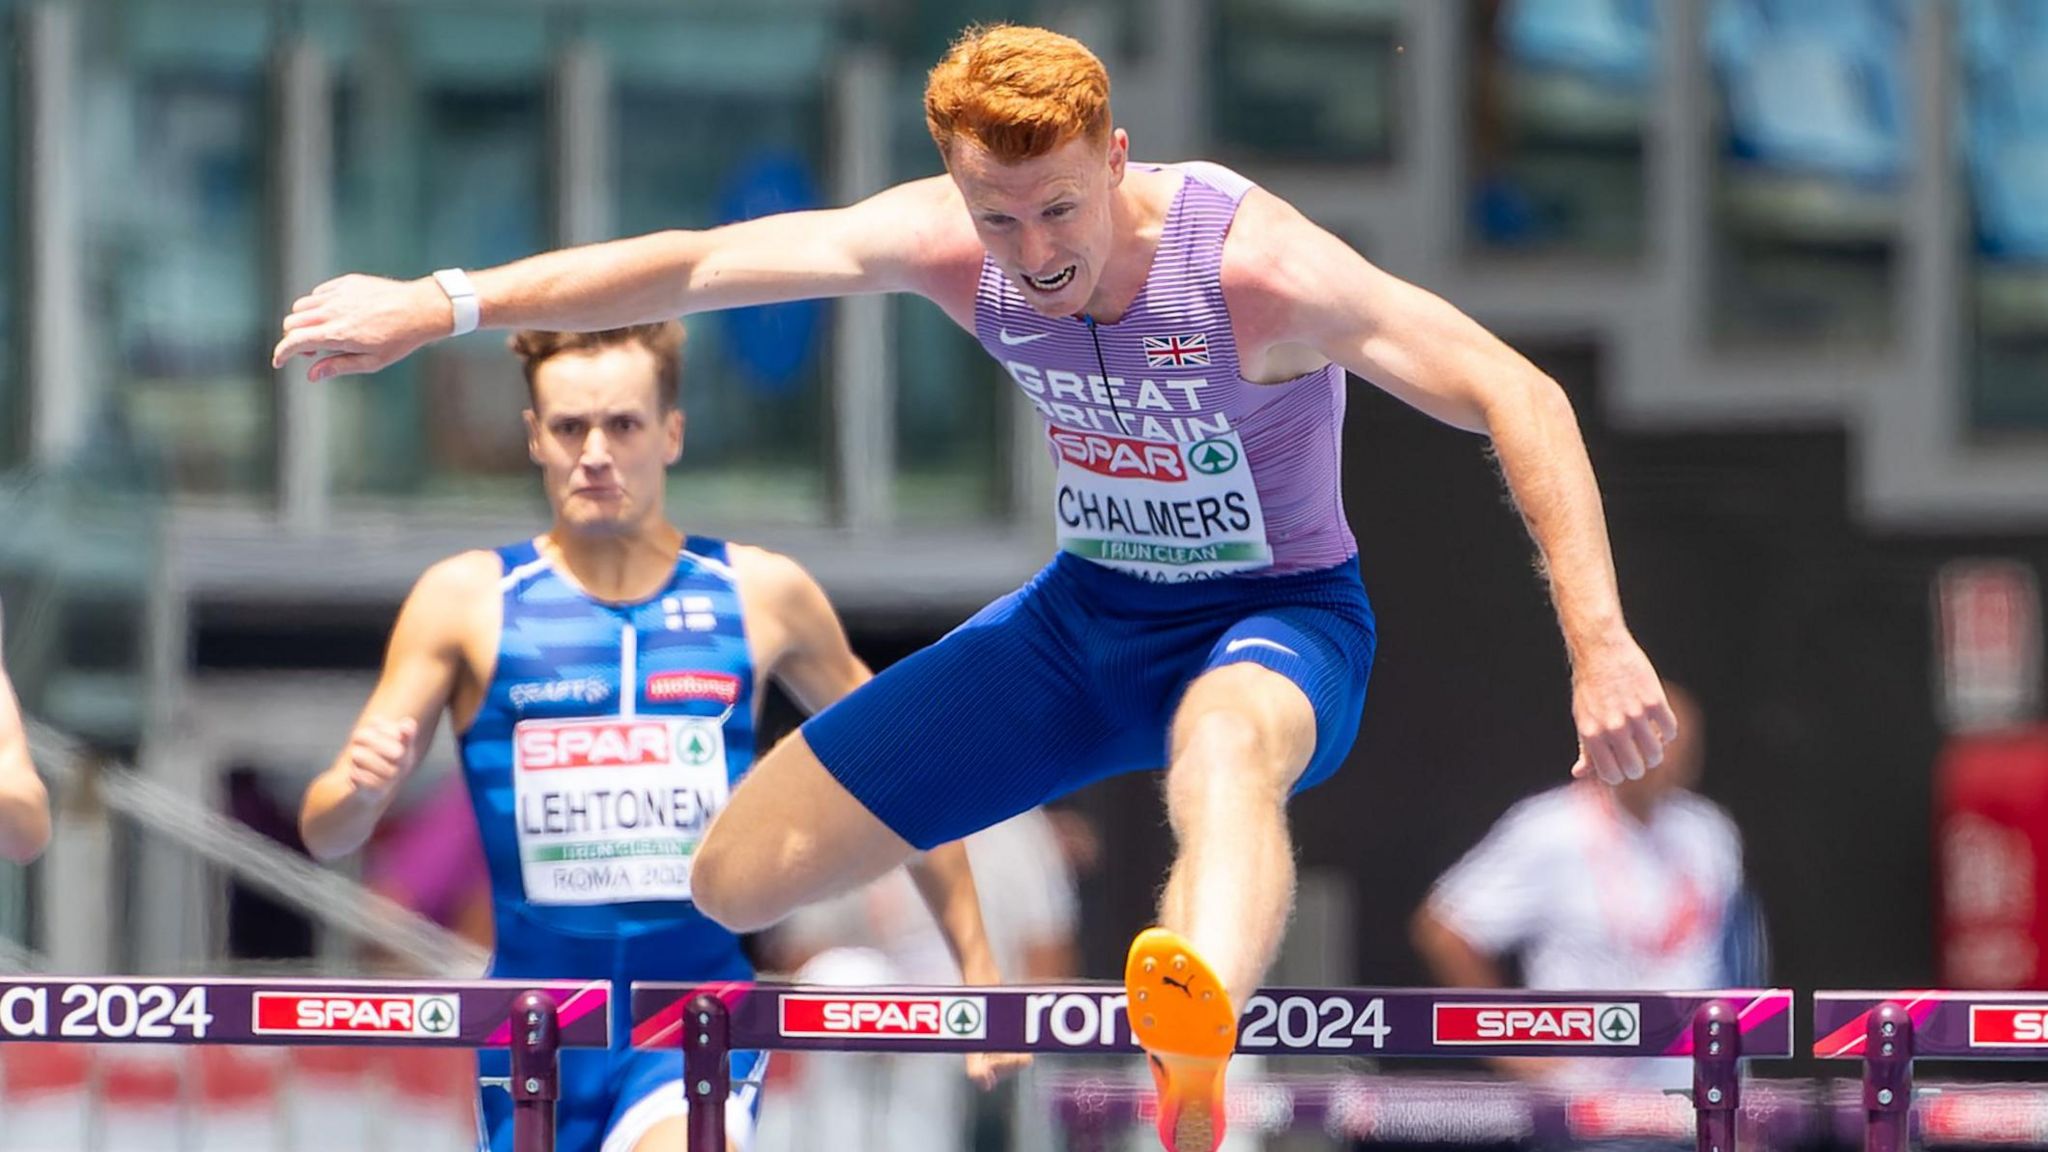 Alastair Chalmers at the European Championships